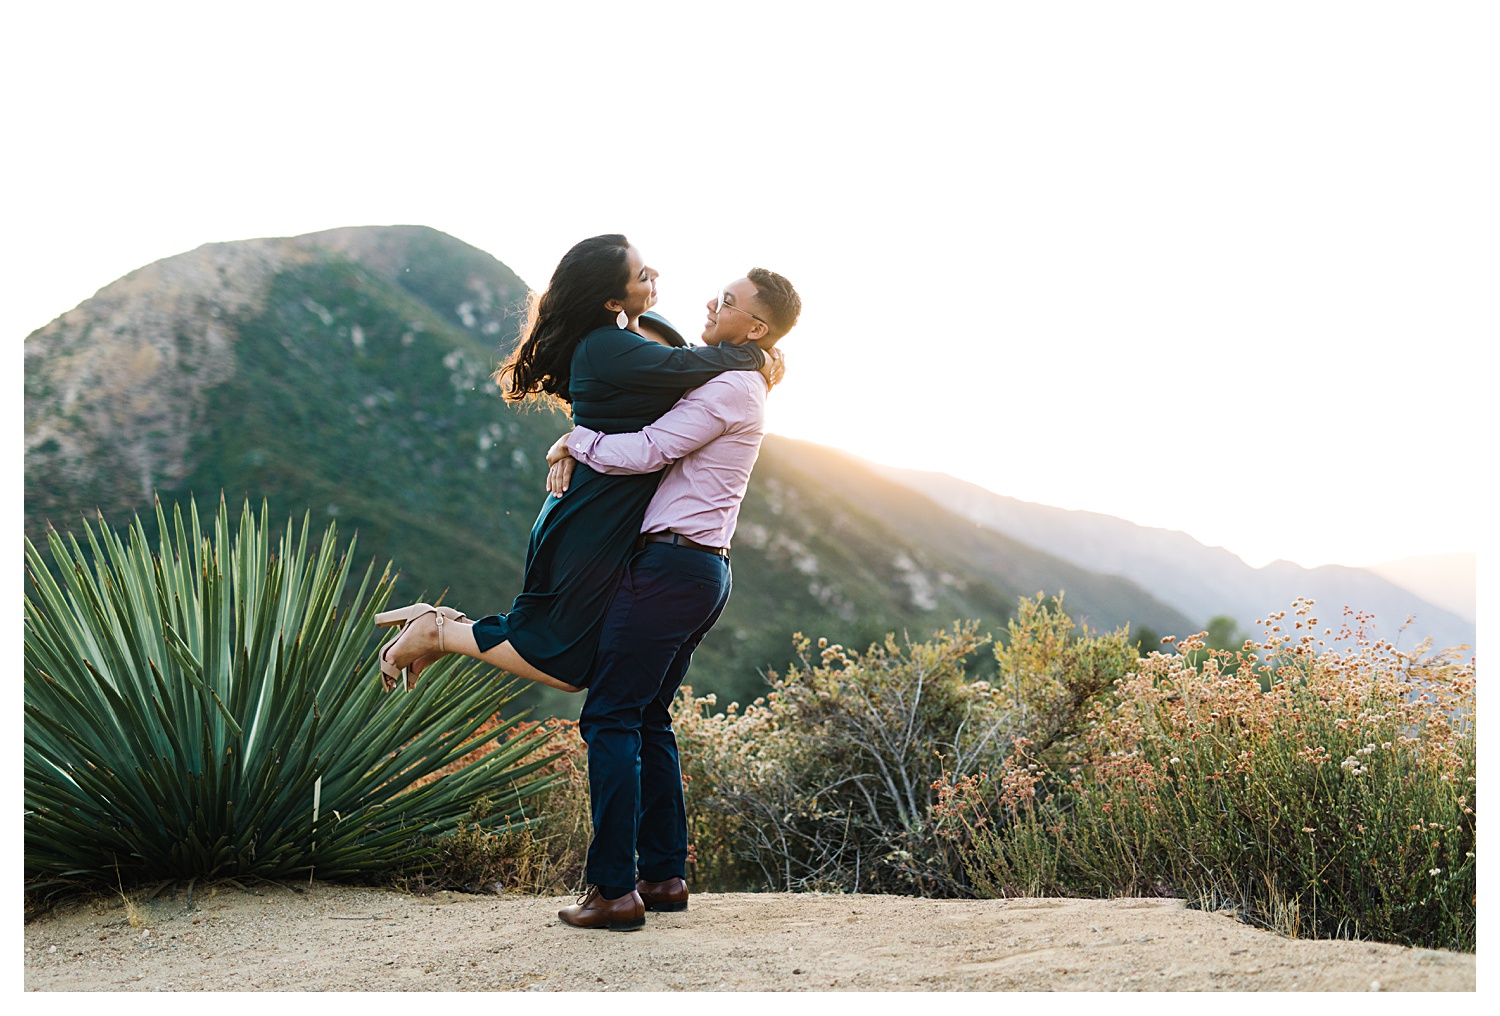 Angeles National Forest Engagement Photos guy spinning girl with mountains in background